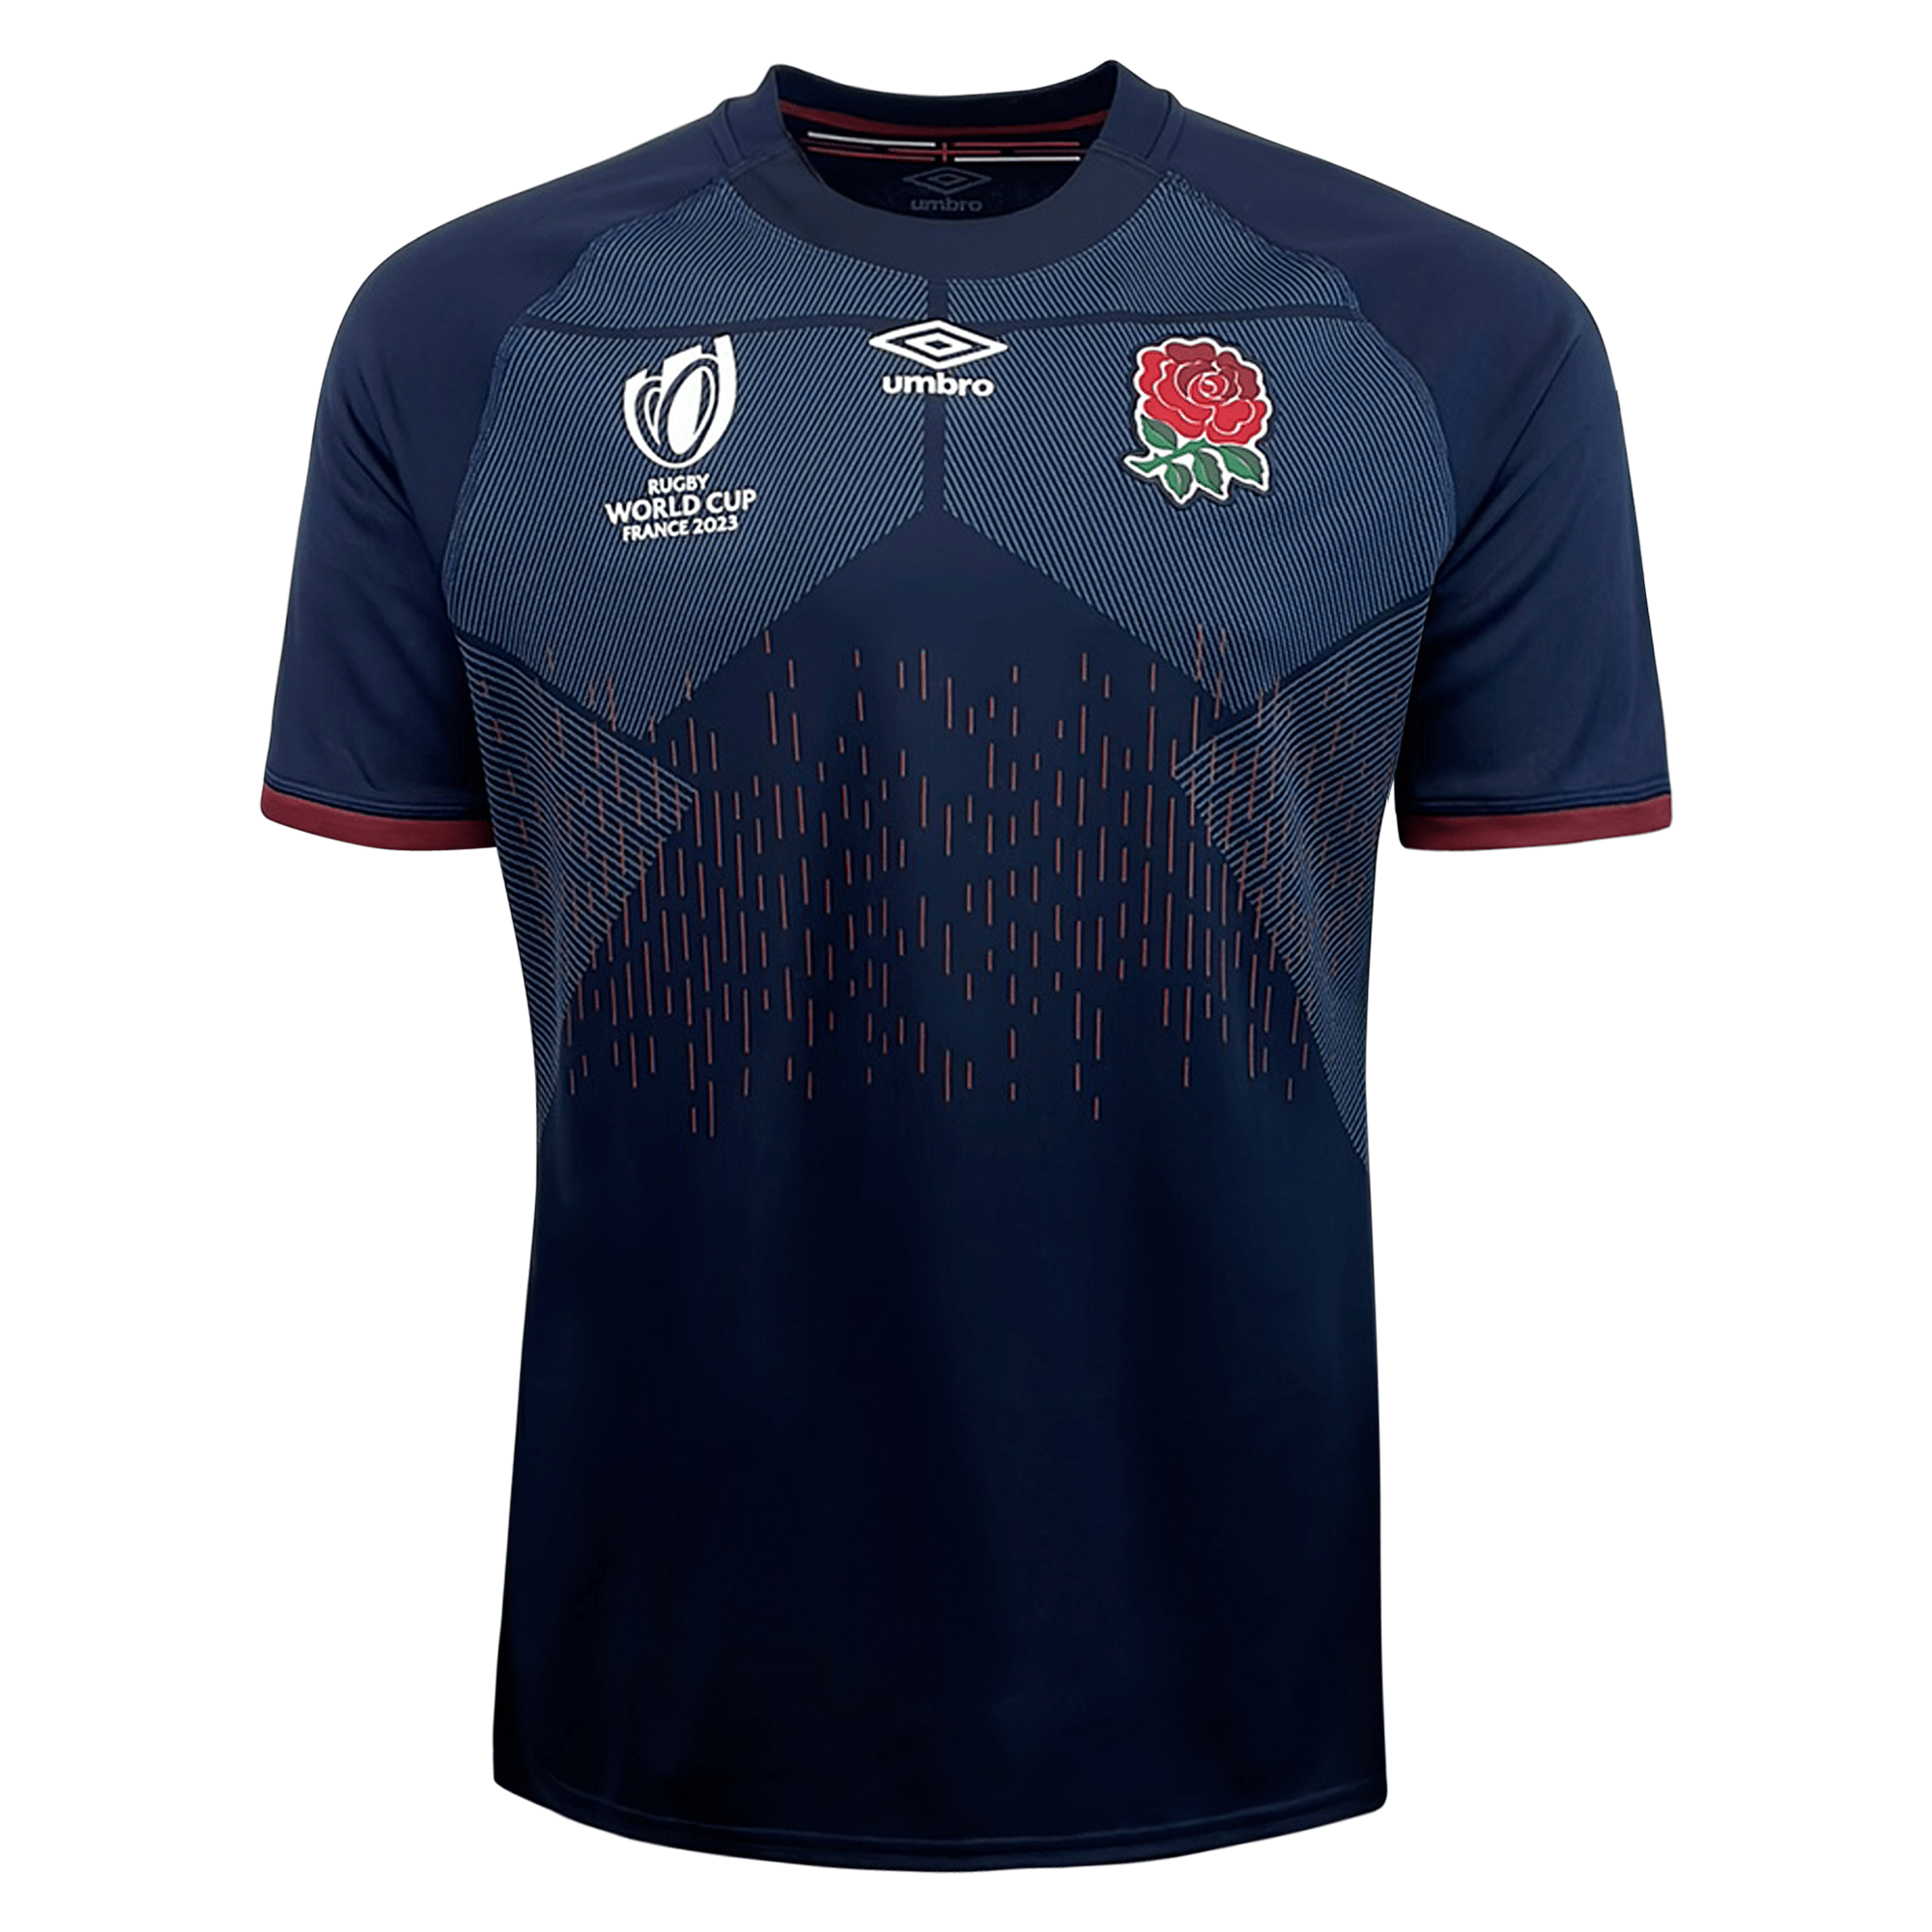 England Rugby Rwc23 Jersey | Alternate Replica Jersey 2023 by Umbro- Blue 2XL